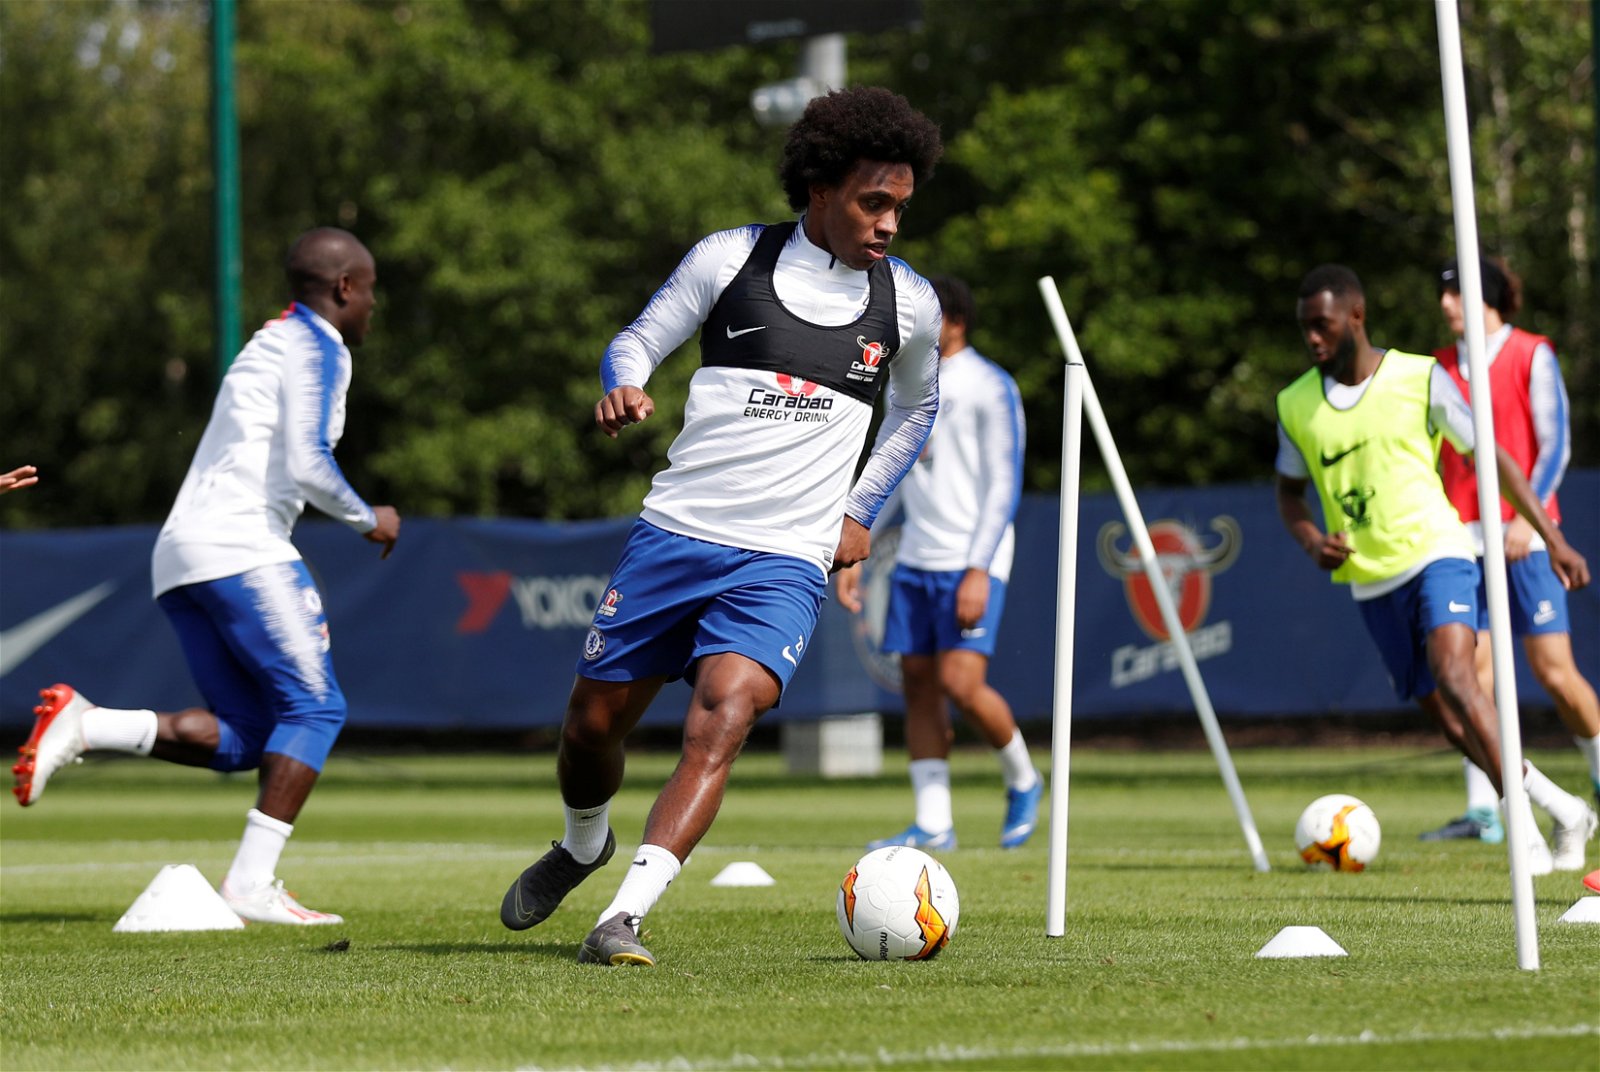 Willian on what makes this season a success